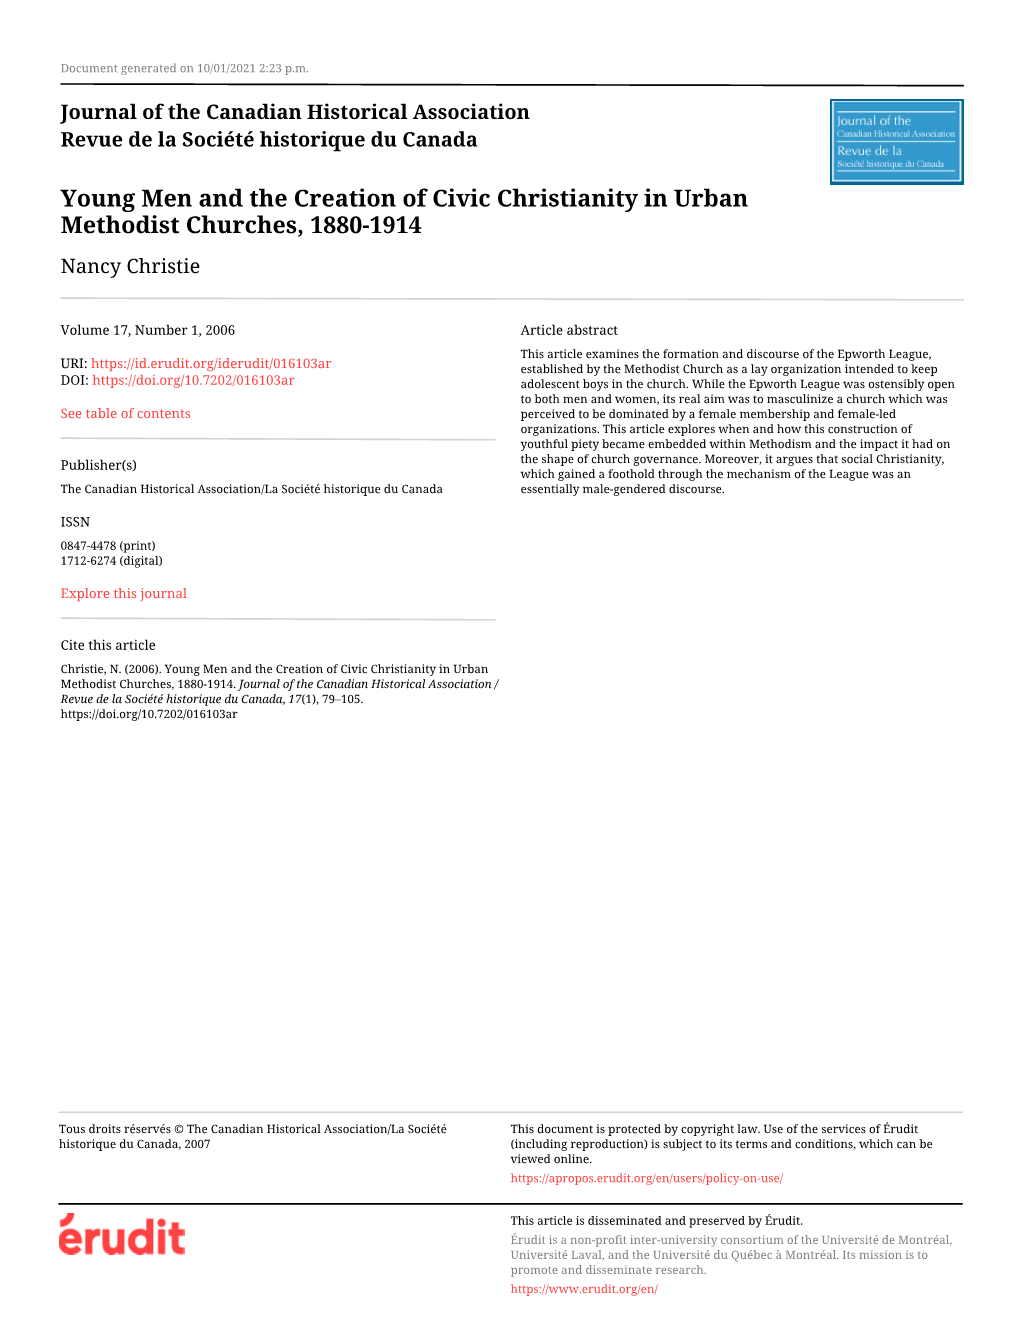 Young Men and the Creation of Civic Christianity in Urban Methodist Churches, 1880-1914 Nancy Christie